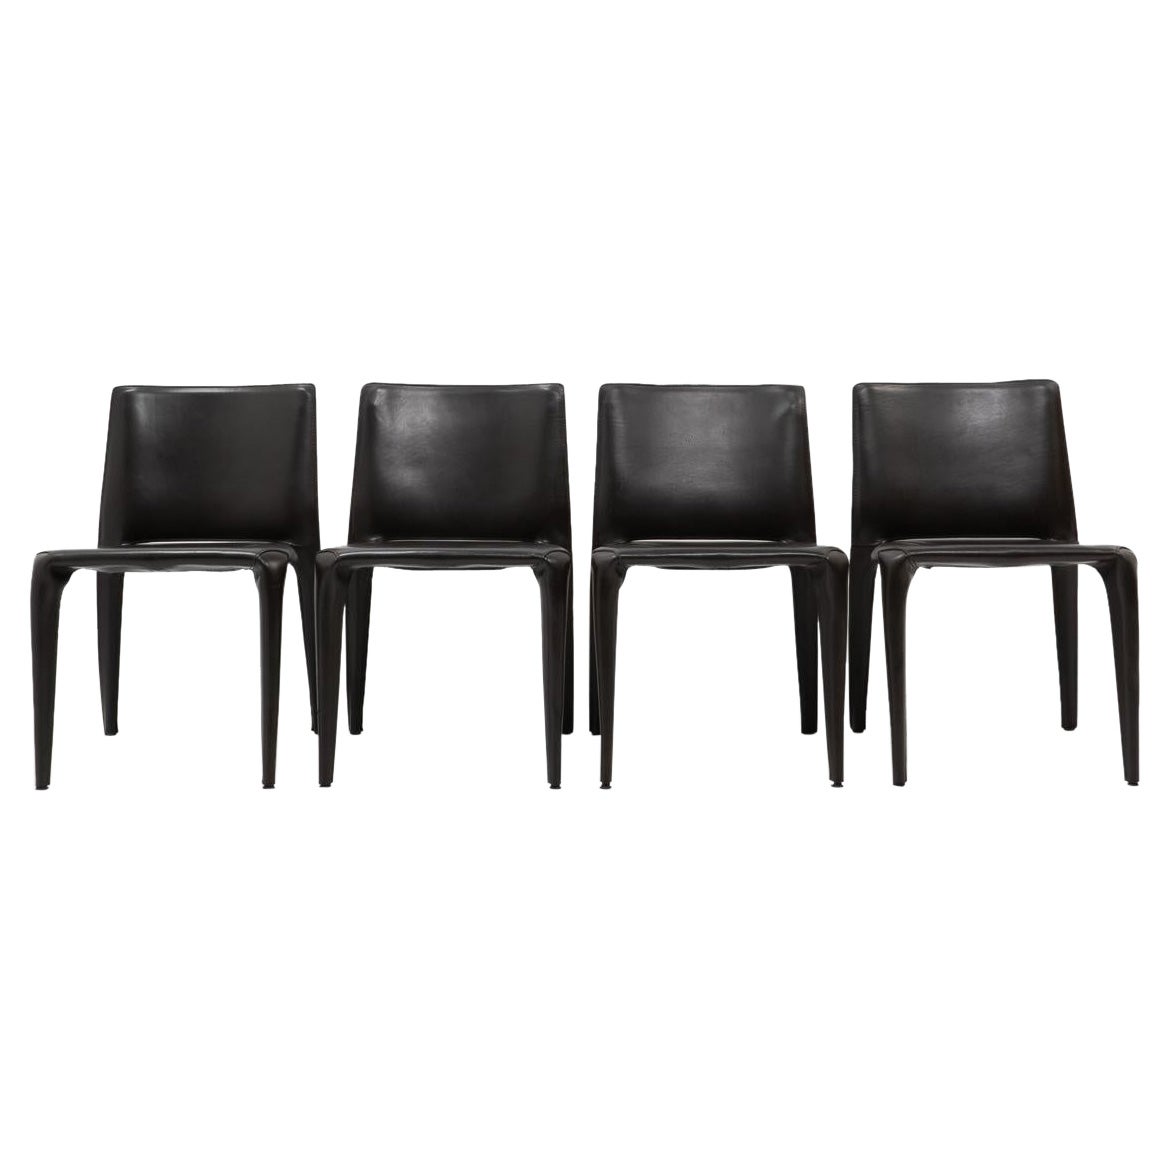 Mario Bellini “Bull” Side Chairs for Cassina, Set of Four, 1990s